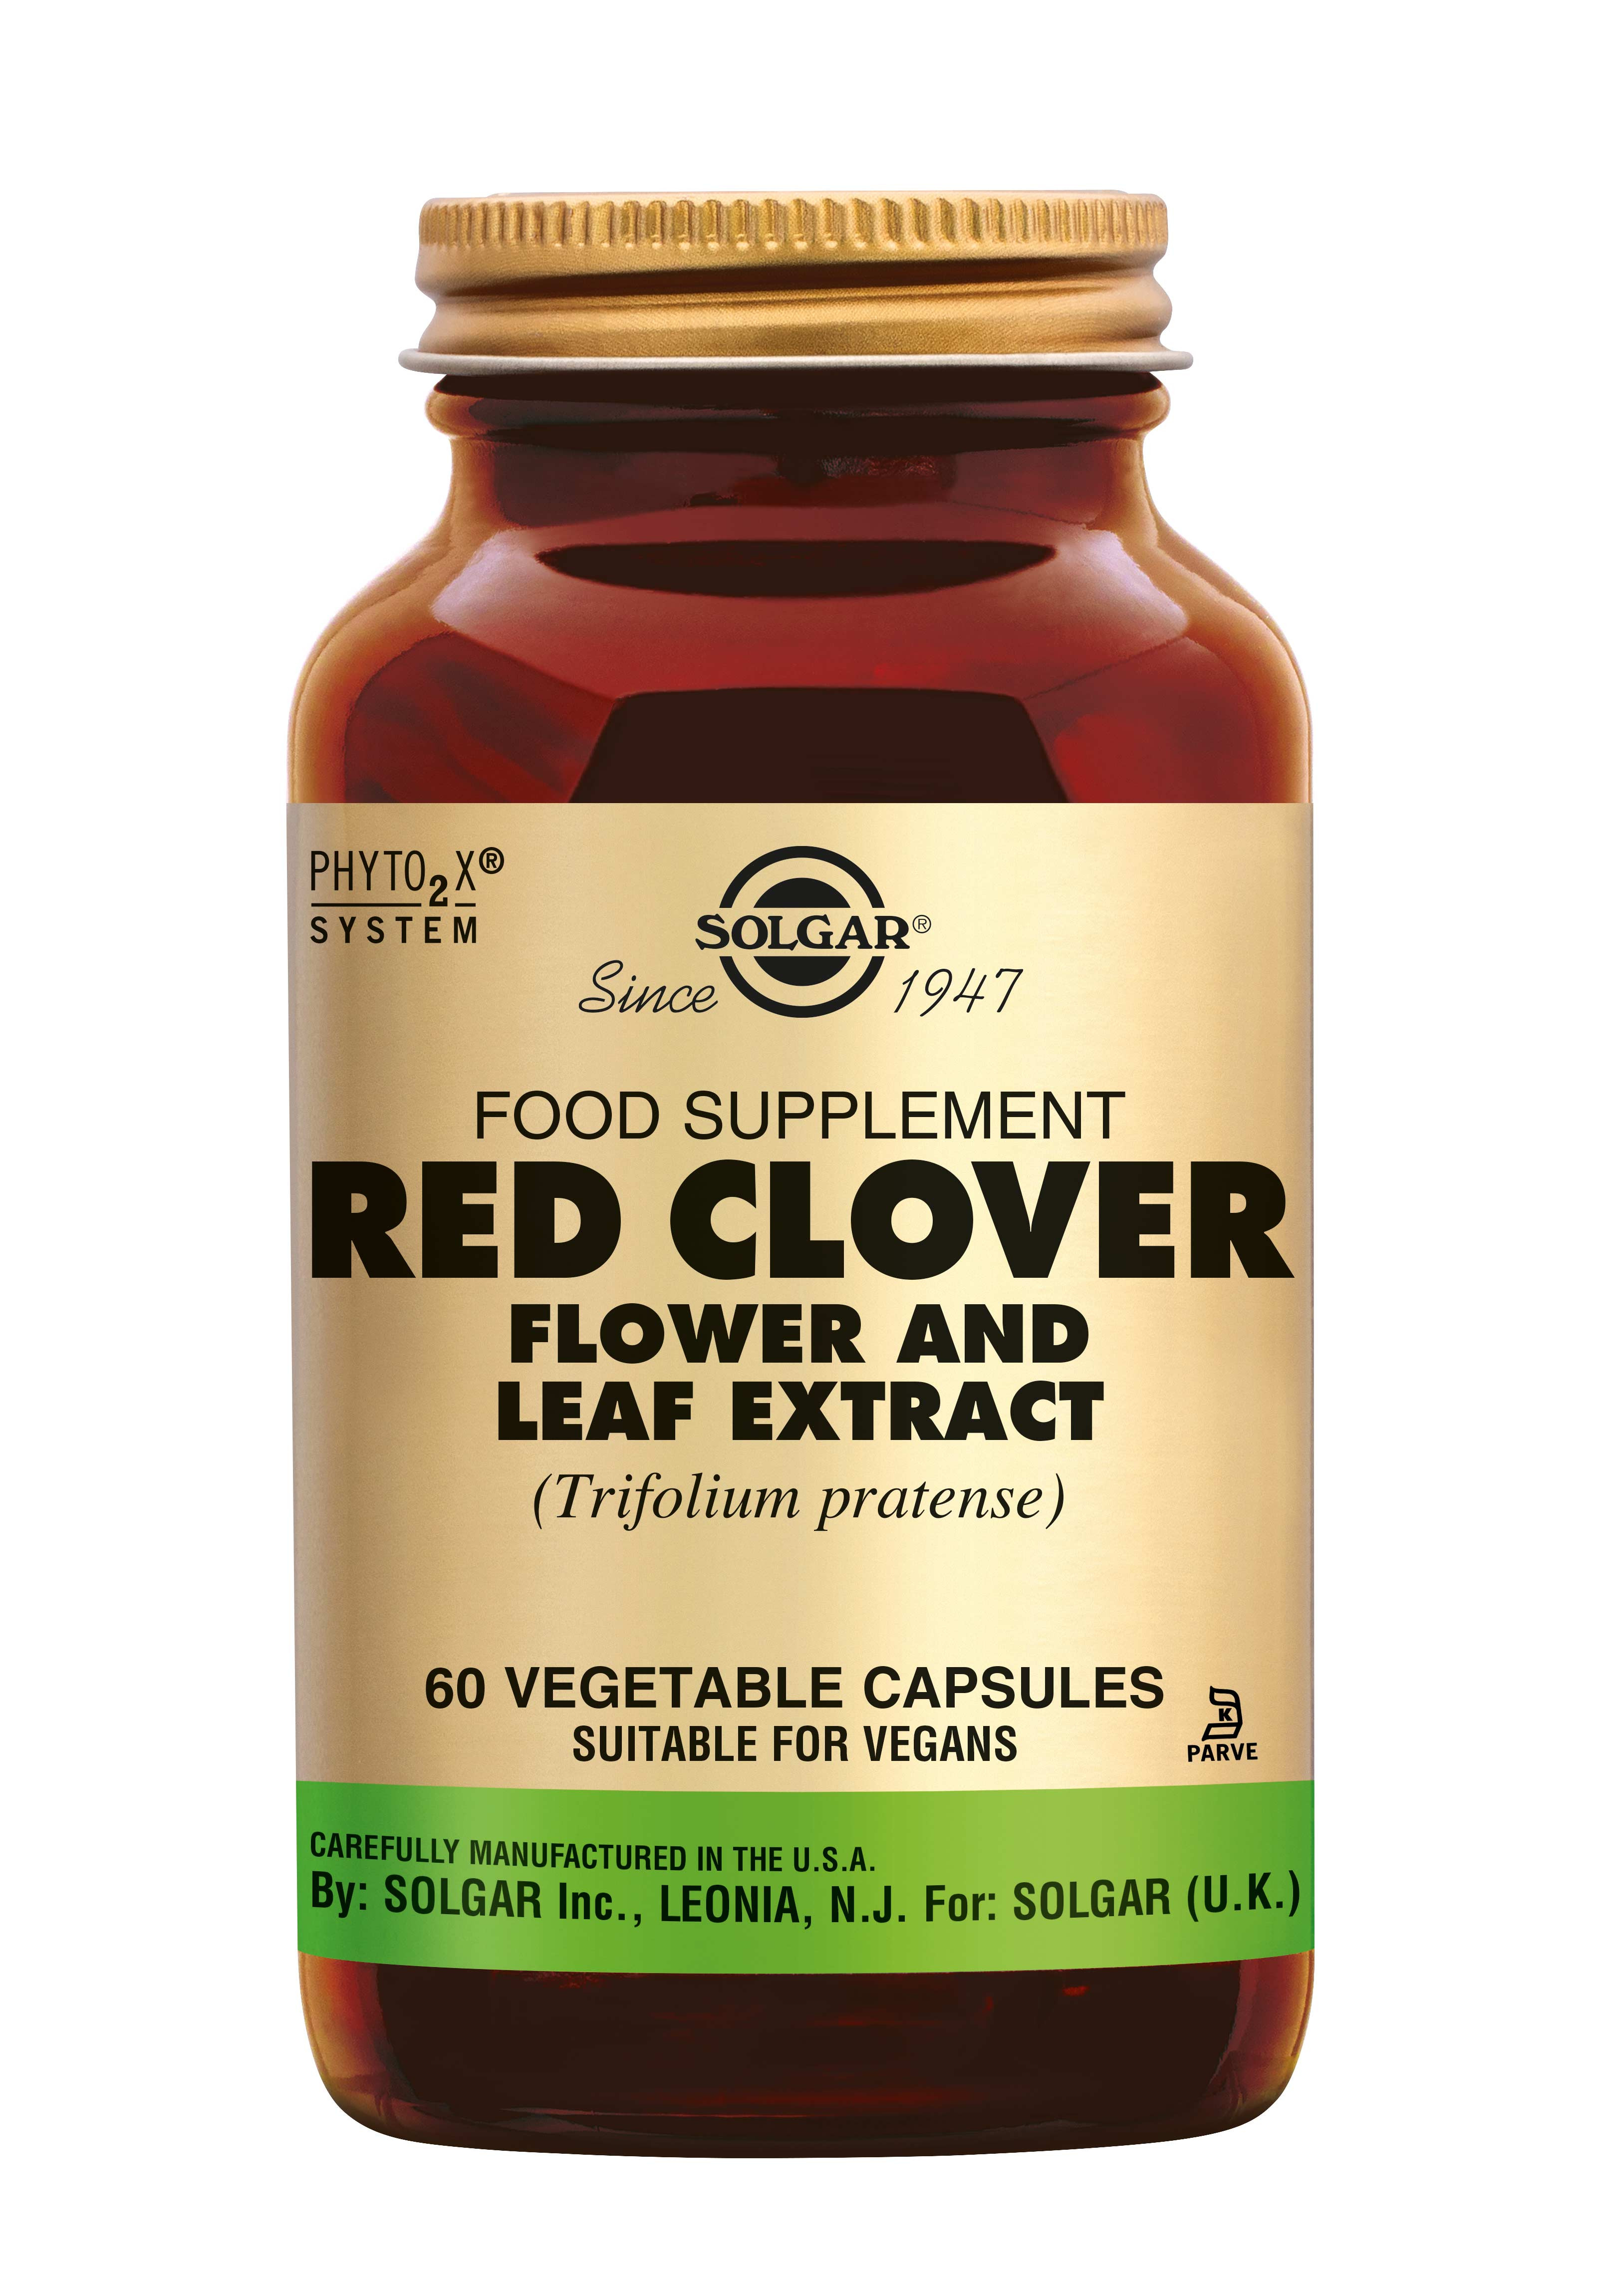 Solgar Red Clover Flower and Leaf Extract